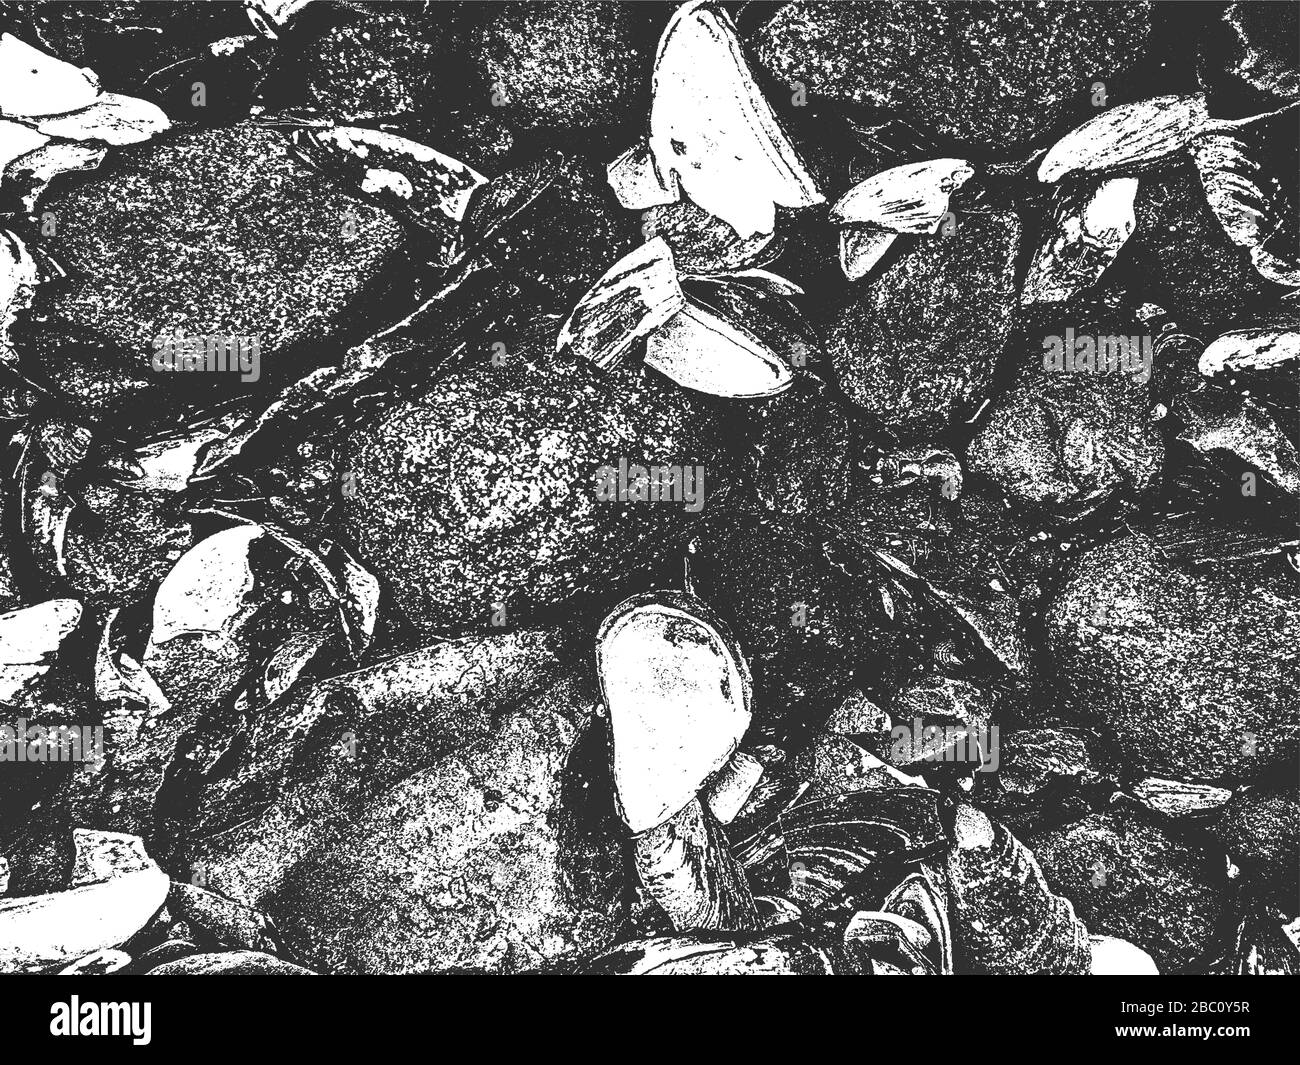 Distress seashell and mussels vector texture. EPS8 illustration. Black and white grunge background. Stock Vector